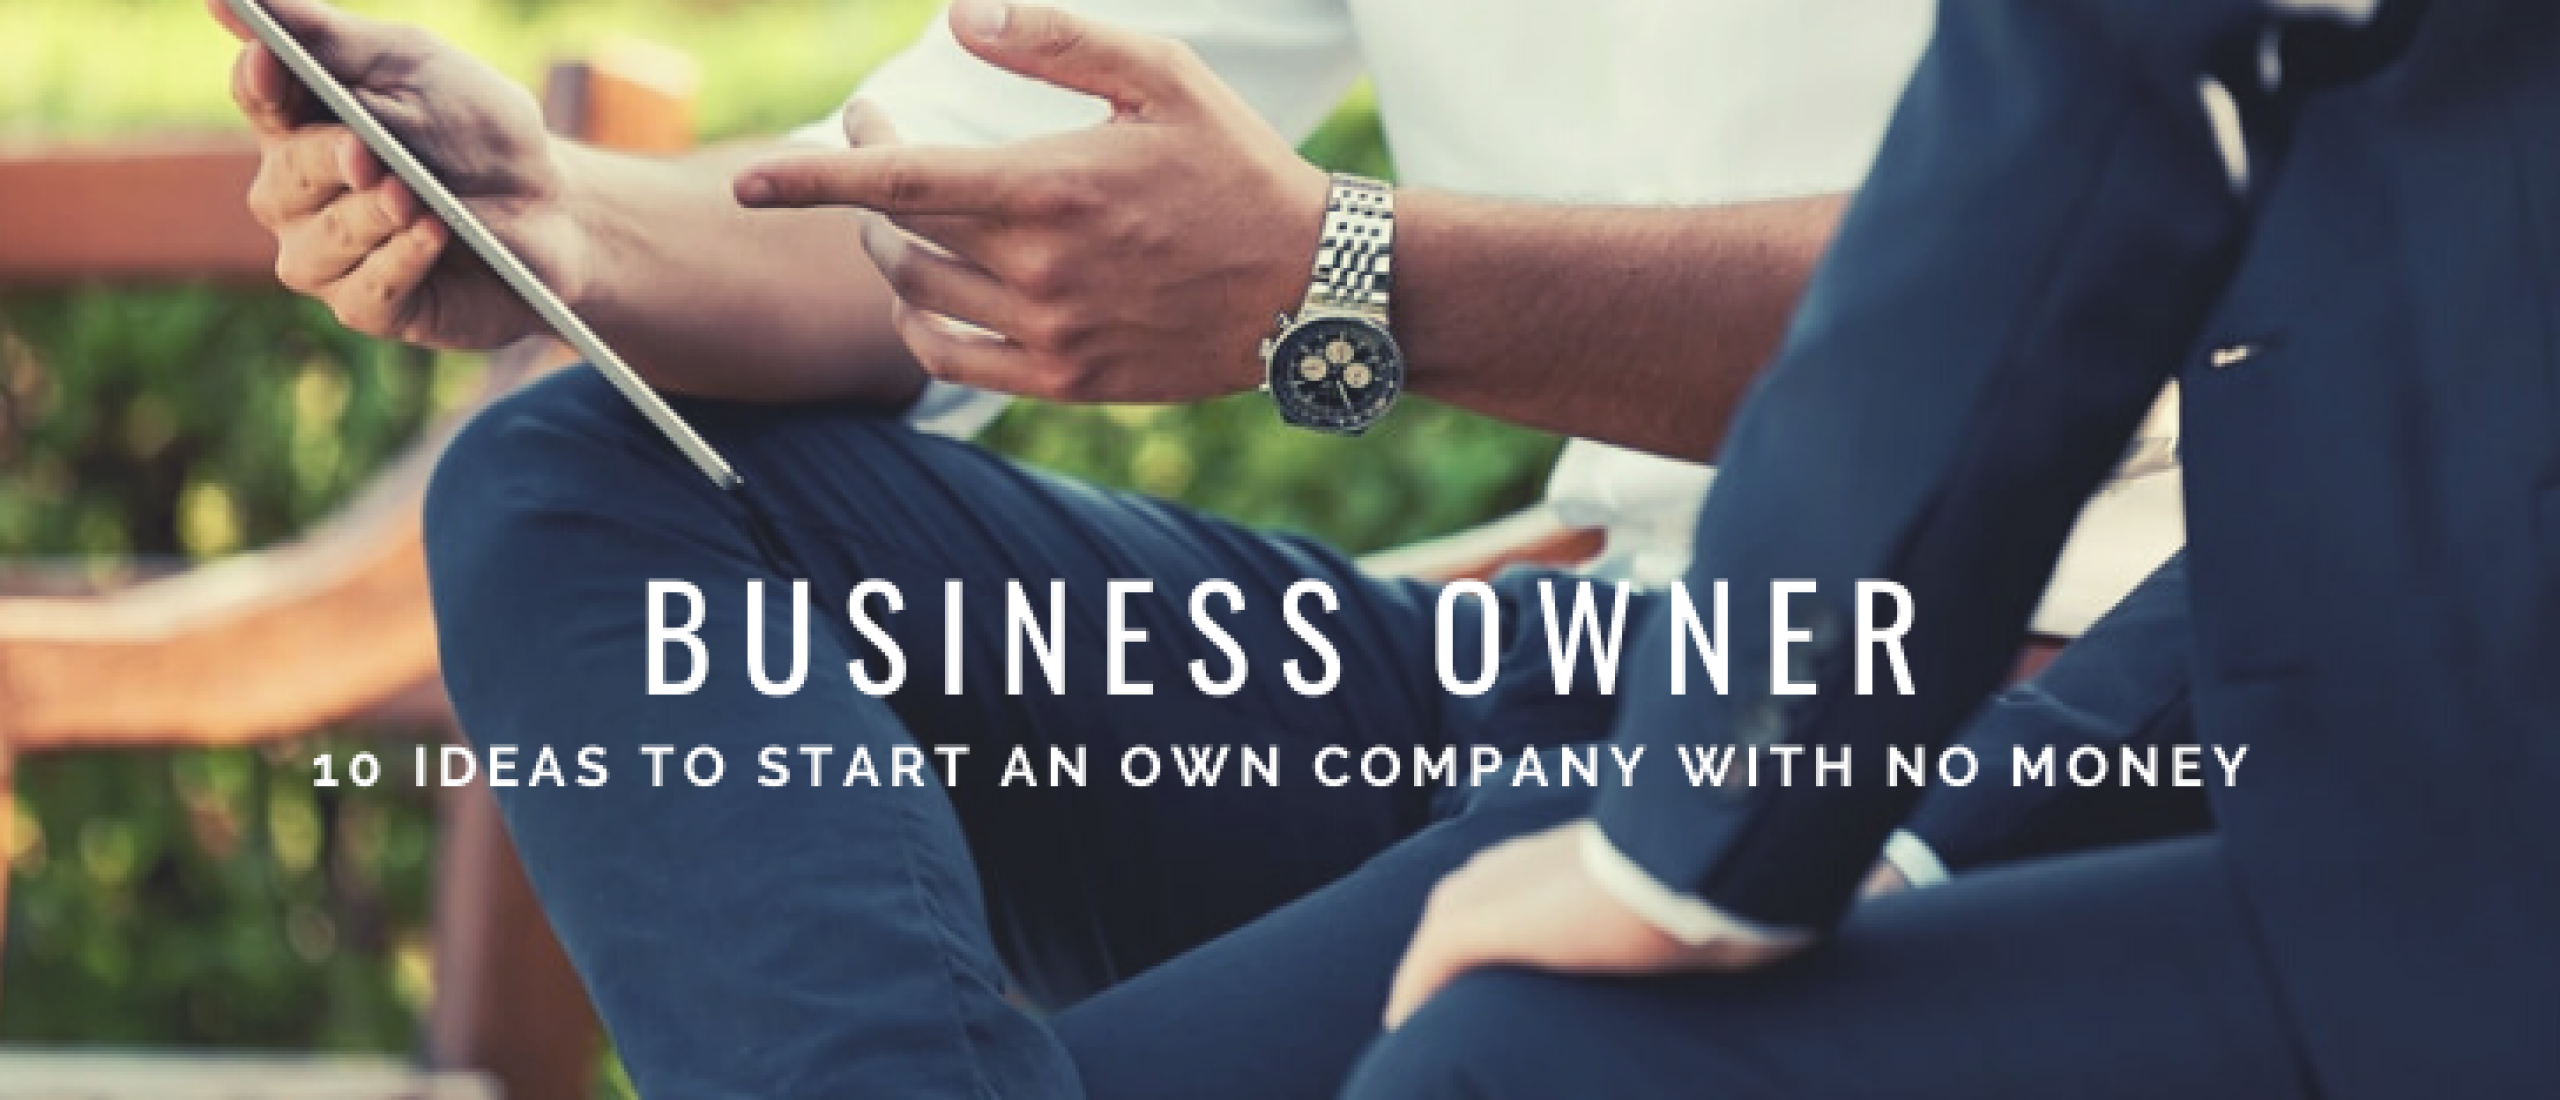 How to Start an Own Company With No Money? 10 Ideas